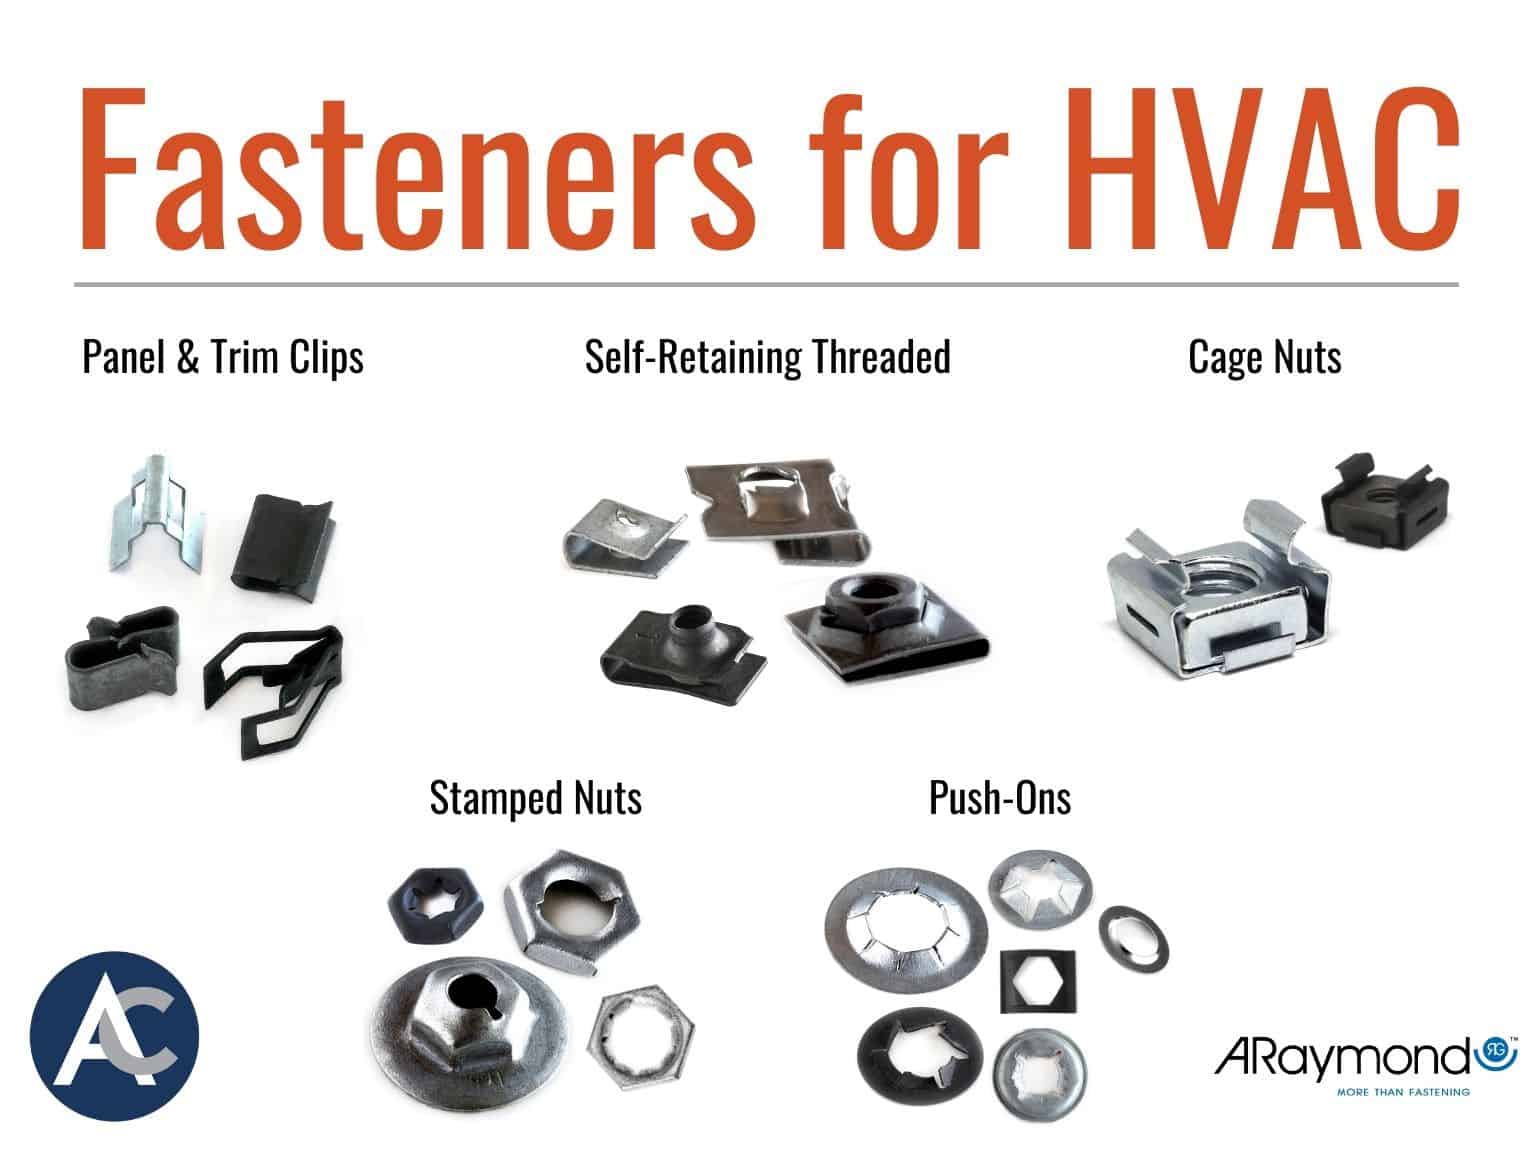 Fasteners for HVAC applications